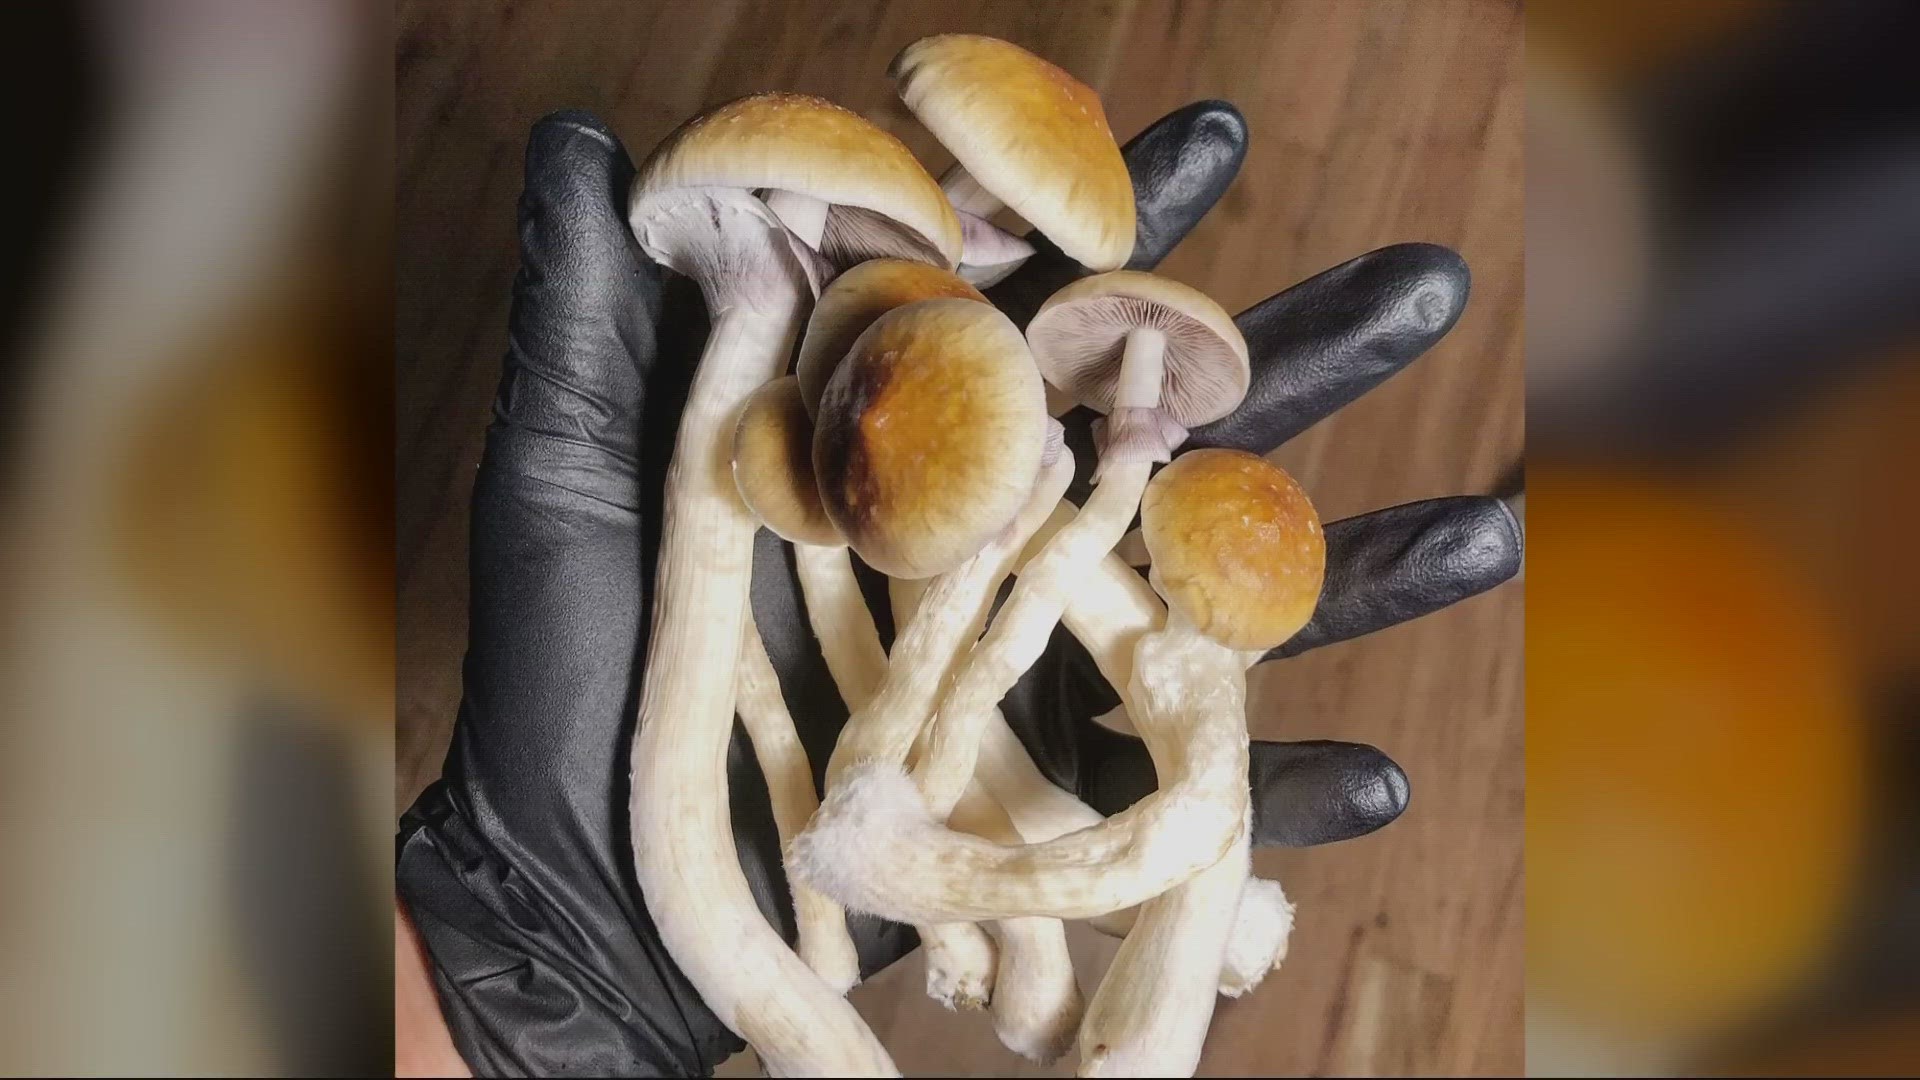 EPIC Healing Eugene is the first psilocybin service center licensed in the state and could start serving clients within weeks.